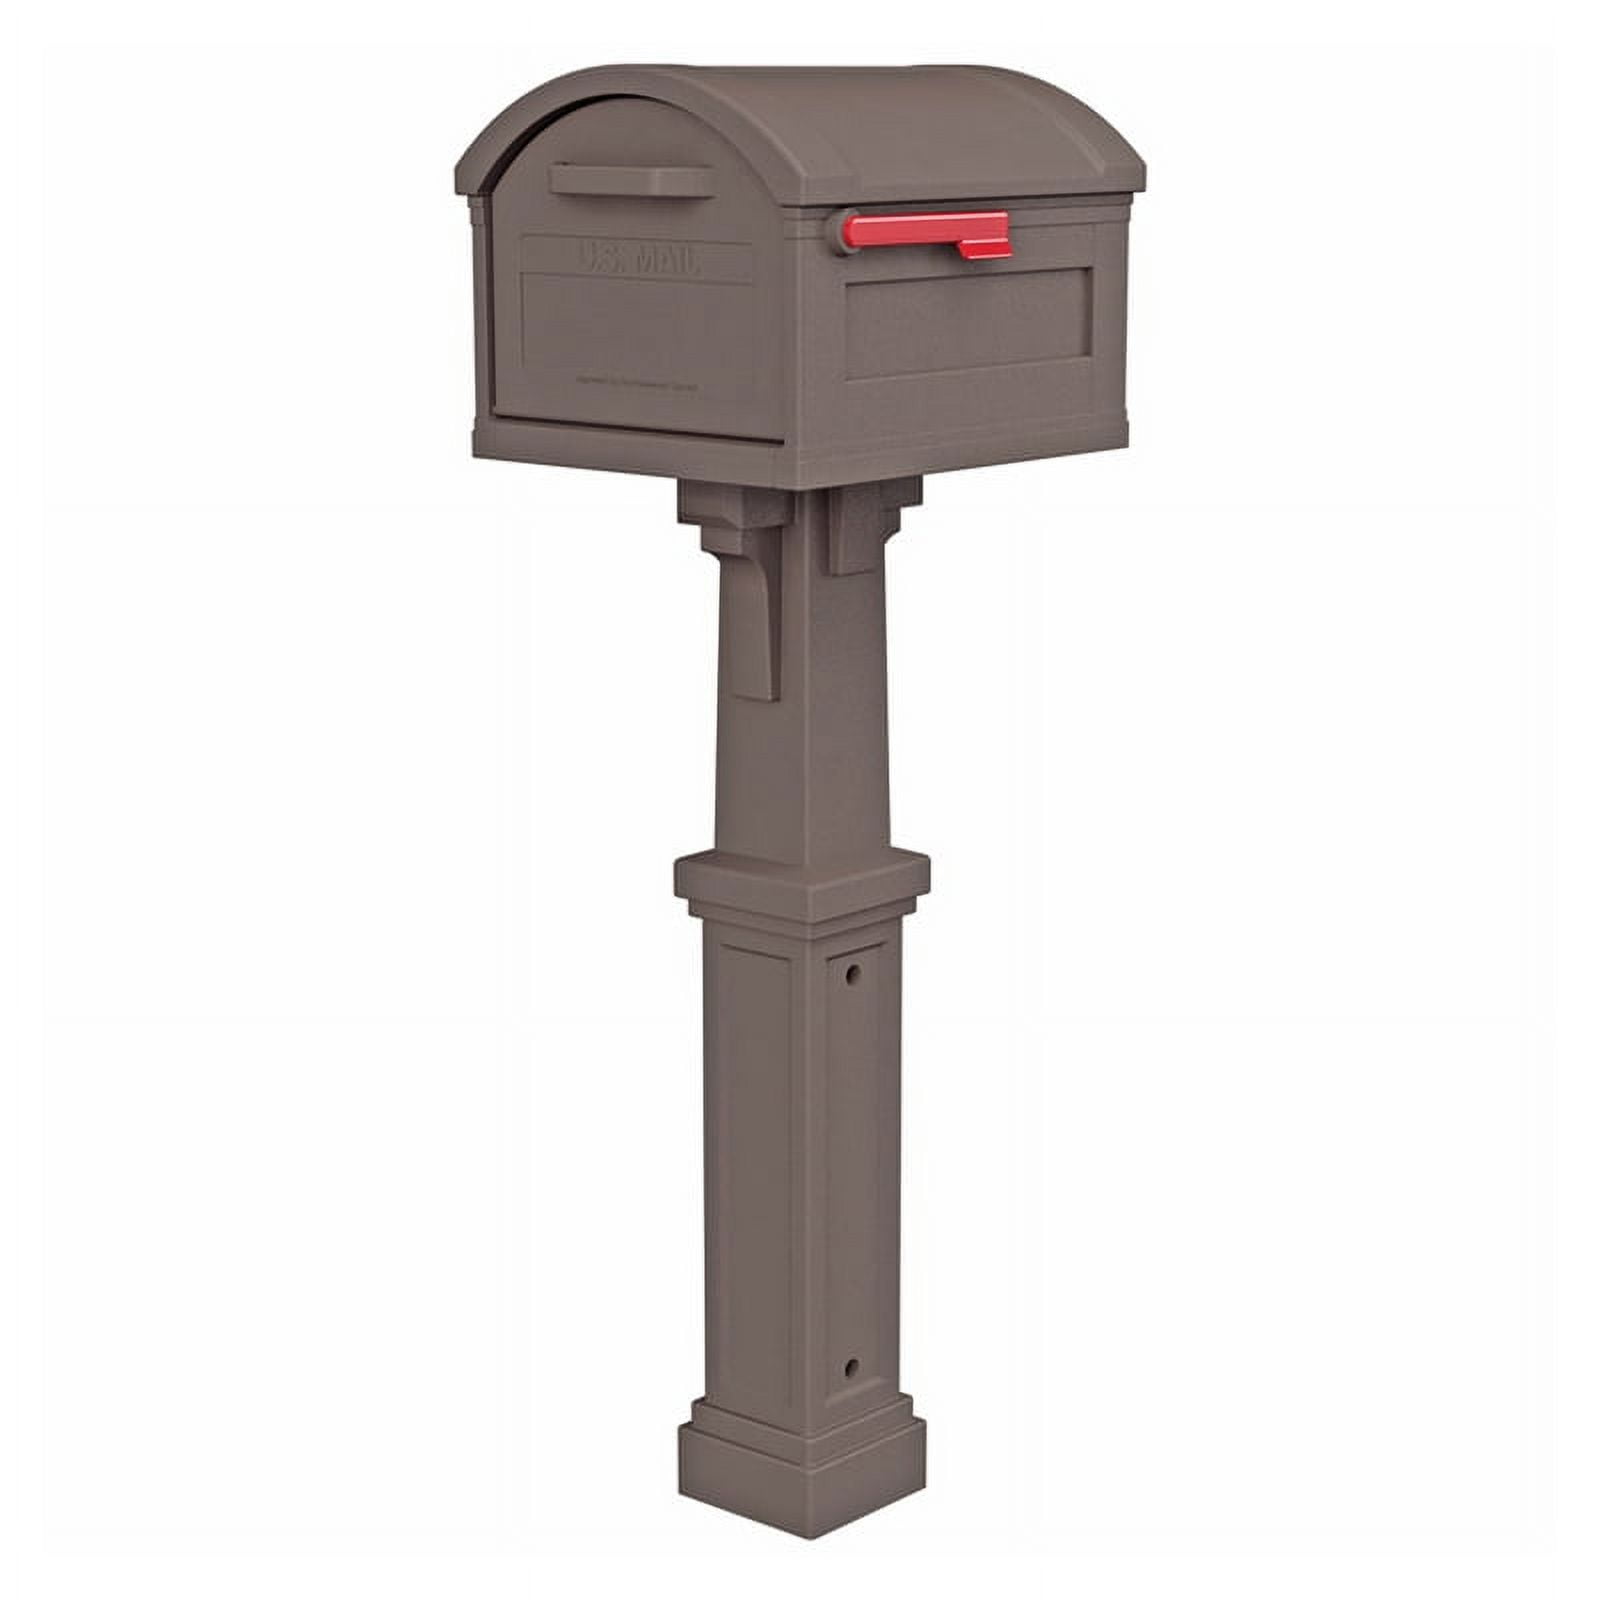 Picture of Grand Haven 5020593 54 x 16.63 x 20 in. Gibraltar Mailboxes Plastic Post & Box Combo Mocha Mailbox